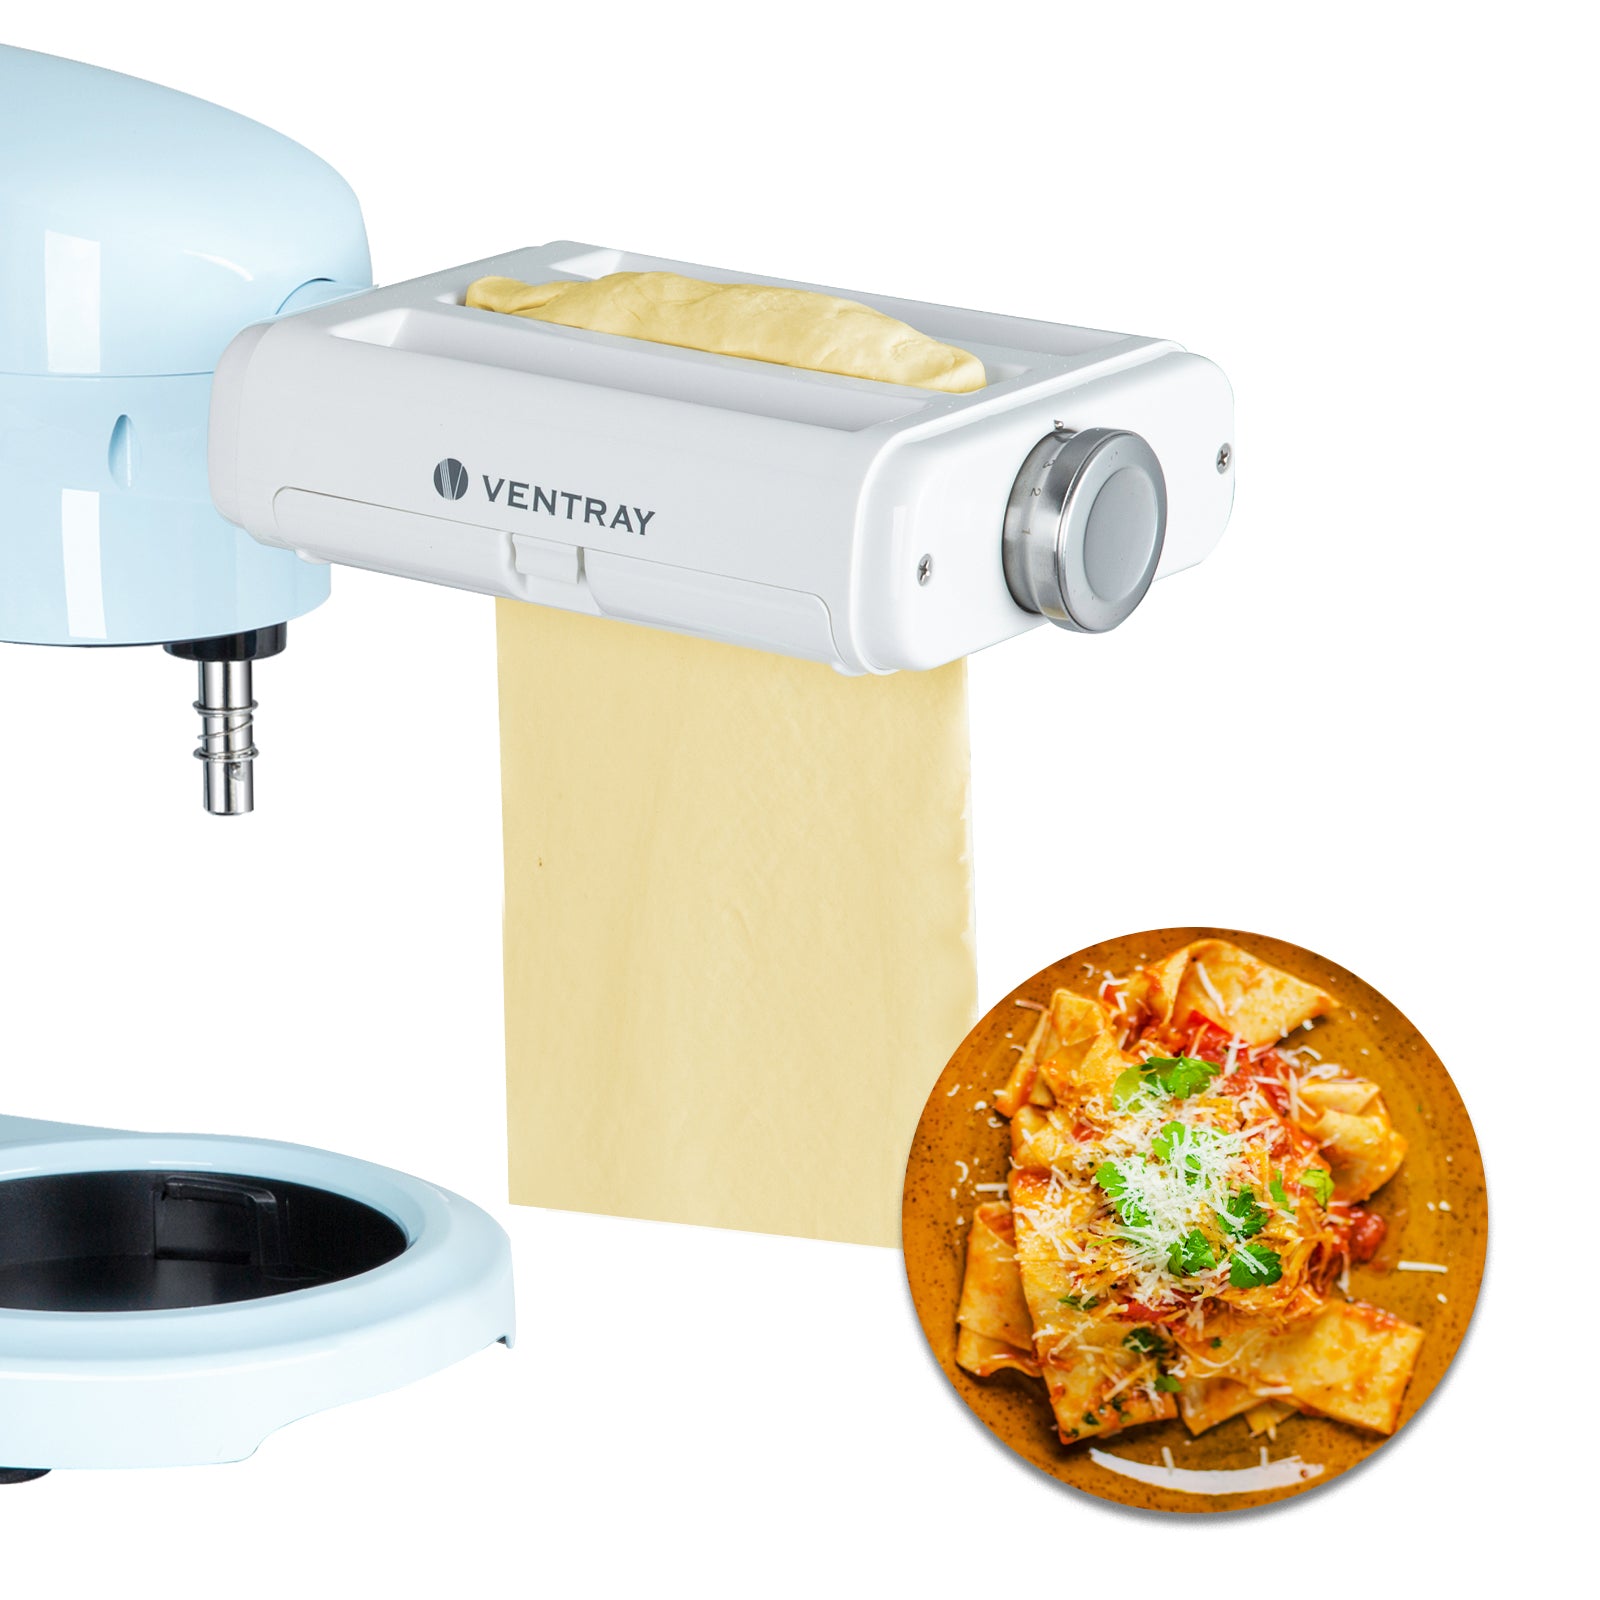 Noodles Maker Machine Portable Manual Operated Stainless Steel Sturdy  Homemade Pasta Maker For Fettuccine Spaghetti Lasagne Dough Roller Press  Cutter Noodle Making Machine 